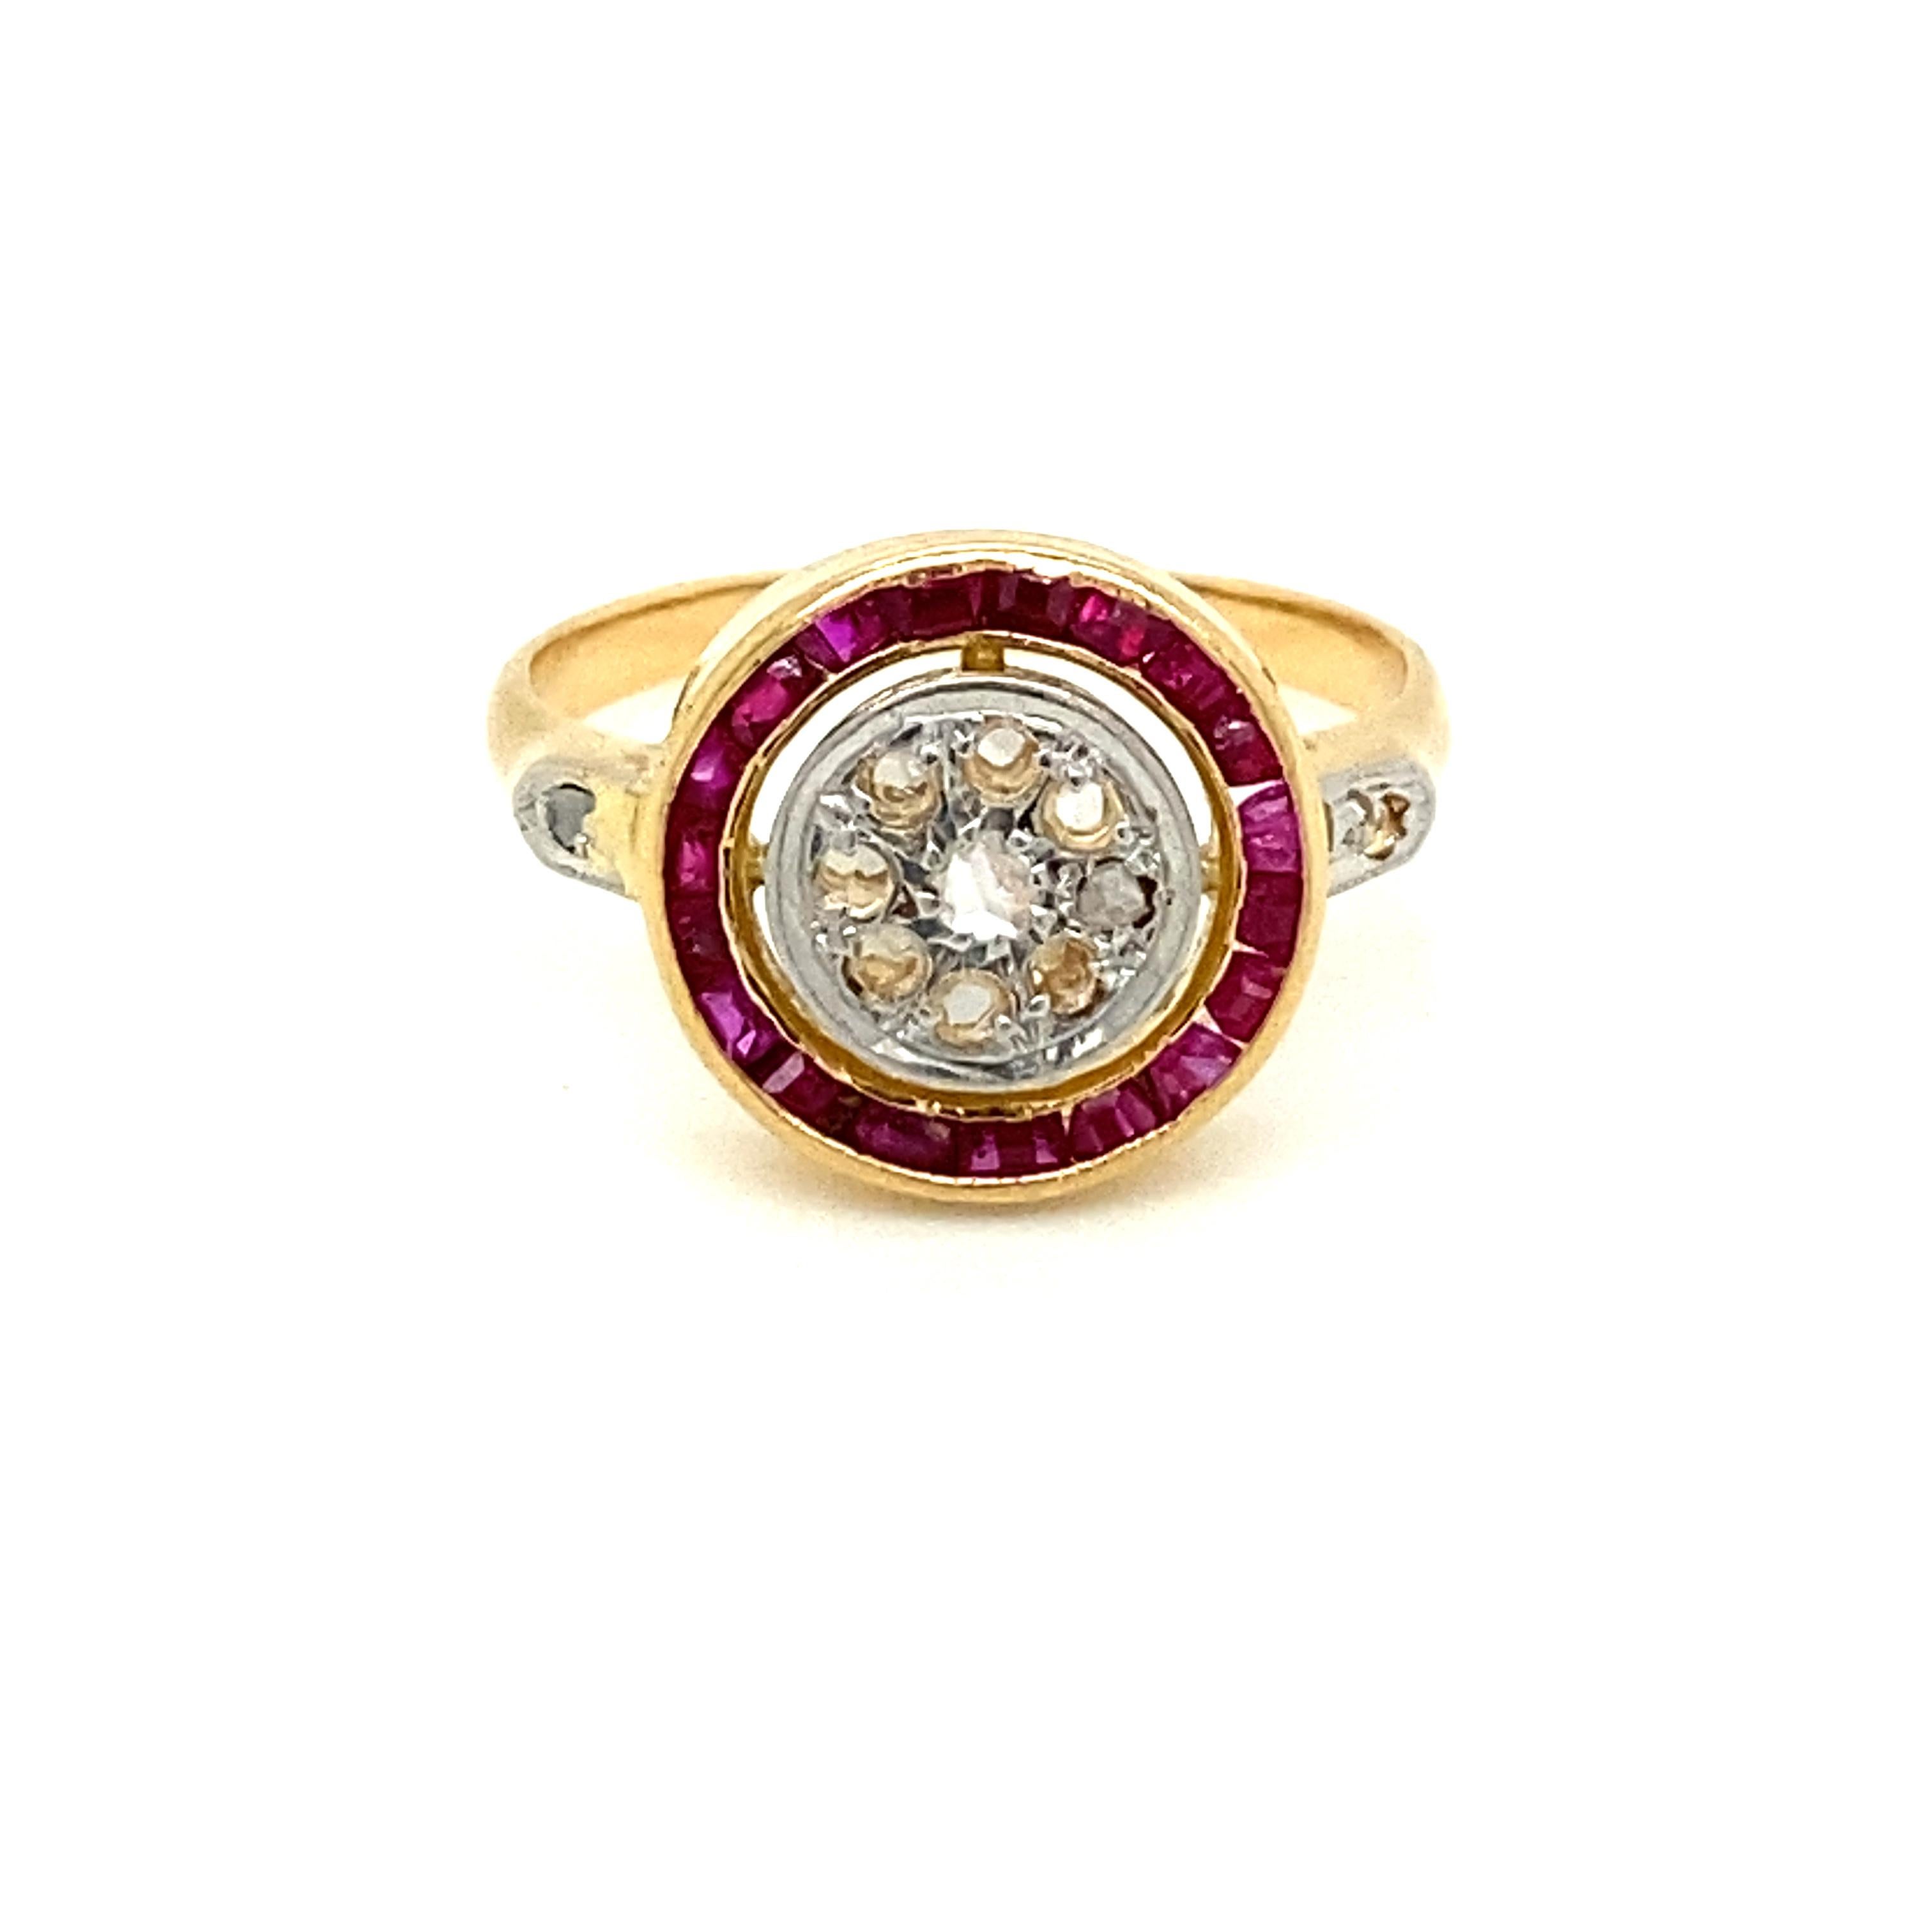 Pretty and authentic Art Deco cluster ring featuring rose cut Diamond and ruby custom cut. Entirely hand crafted in 14k gold, this beautiful ring dates to the 1930's.

CONDITION: Pre-owned - Excellent 10/10
METAL: 14k White Gold
DESIGN ERA: Art